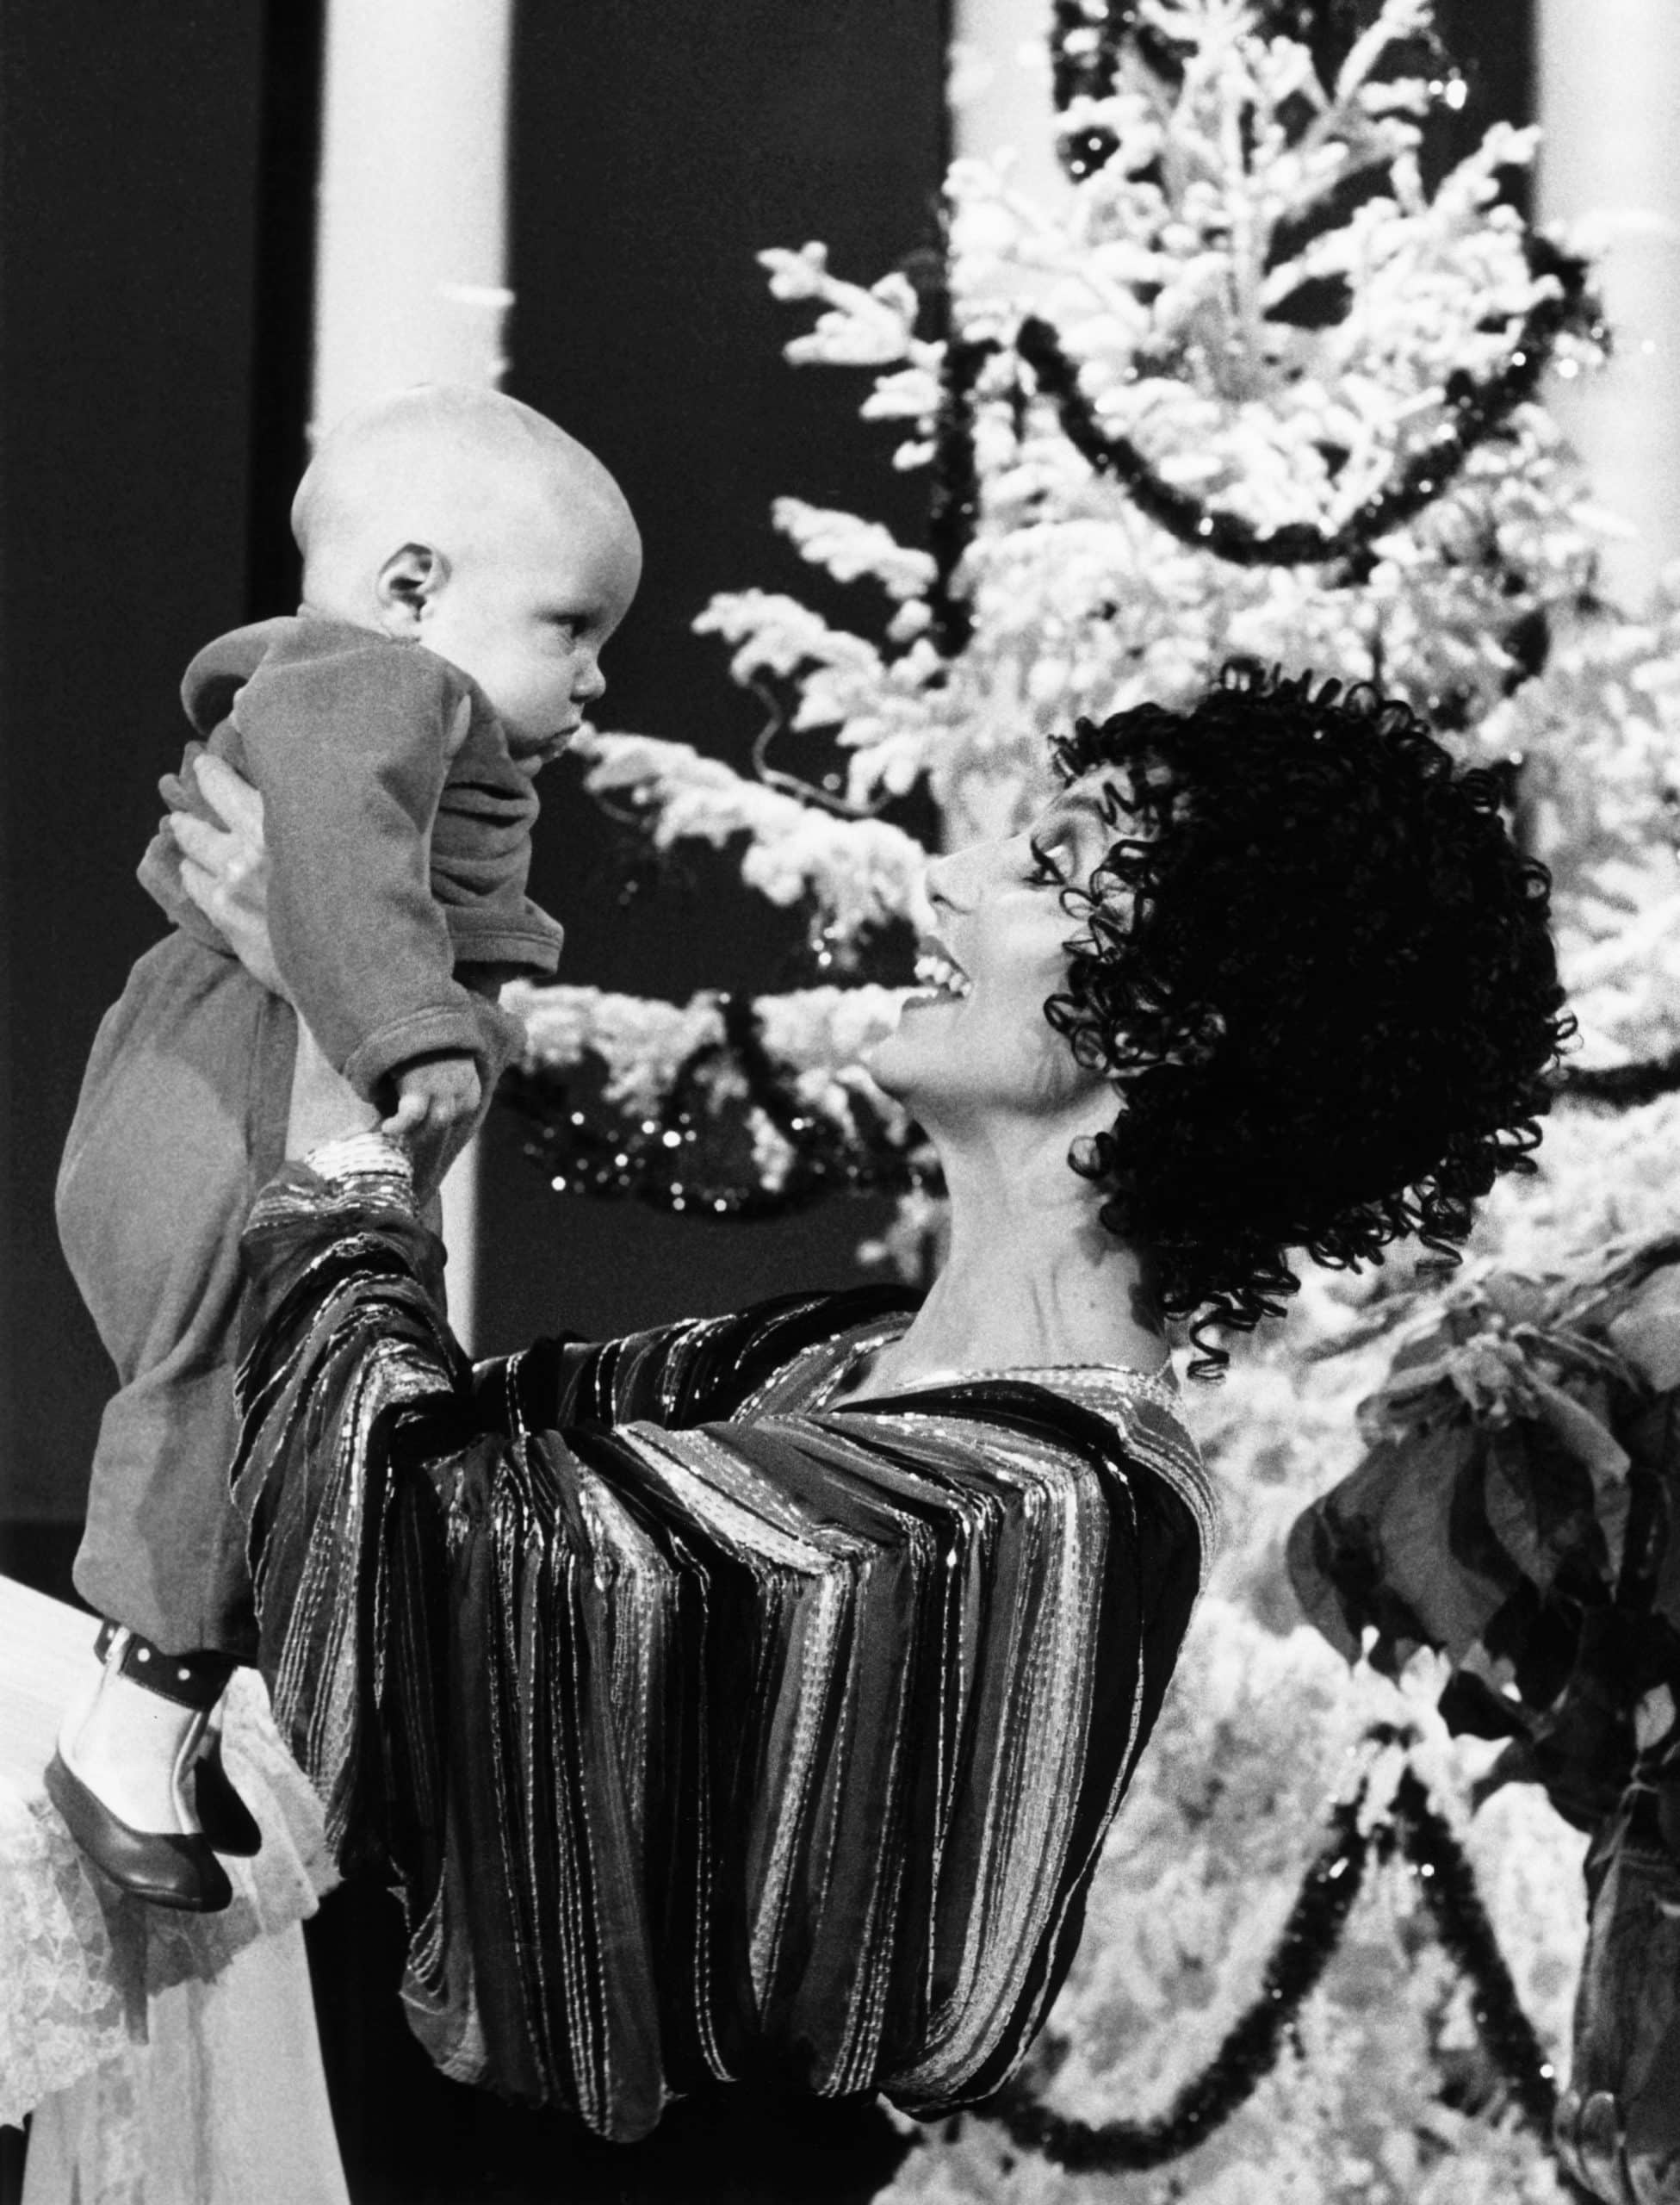 THE SONNY AND CHER SHOW, Cher, with newborn son Elijah Blue Allman